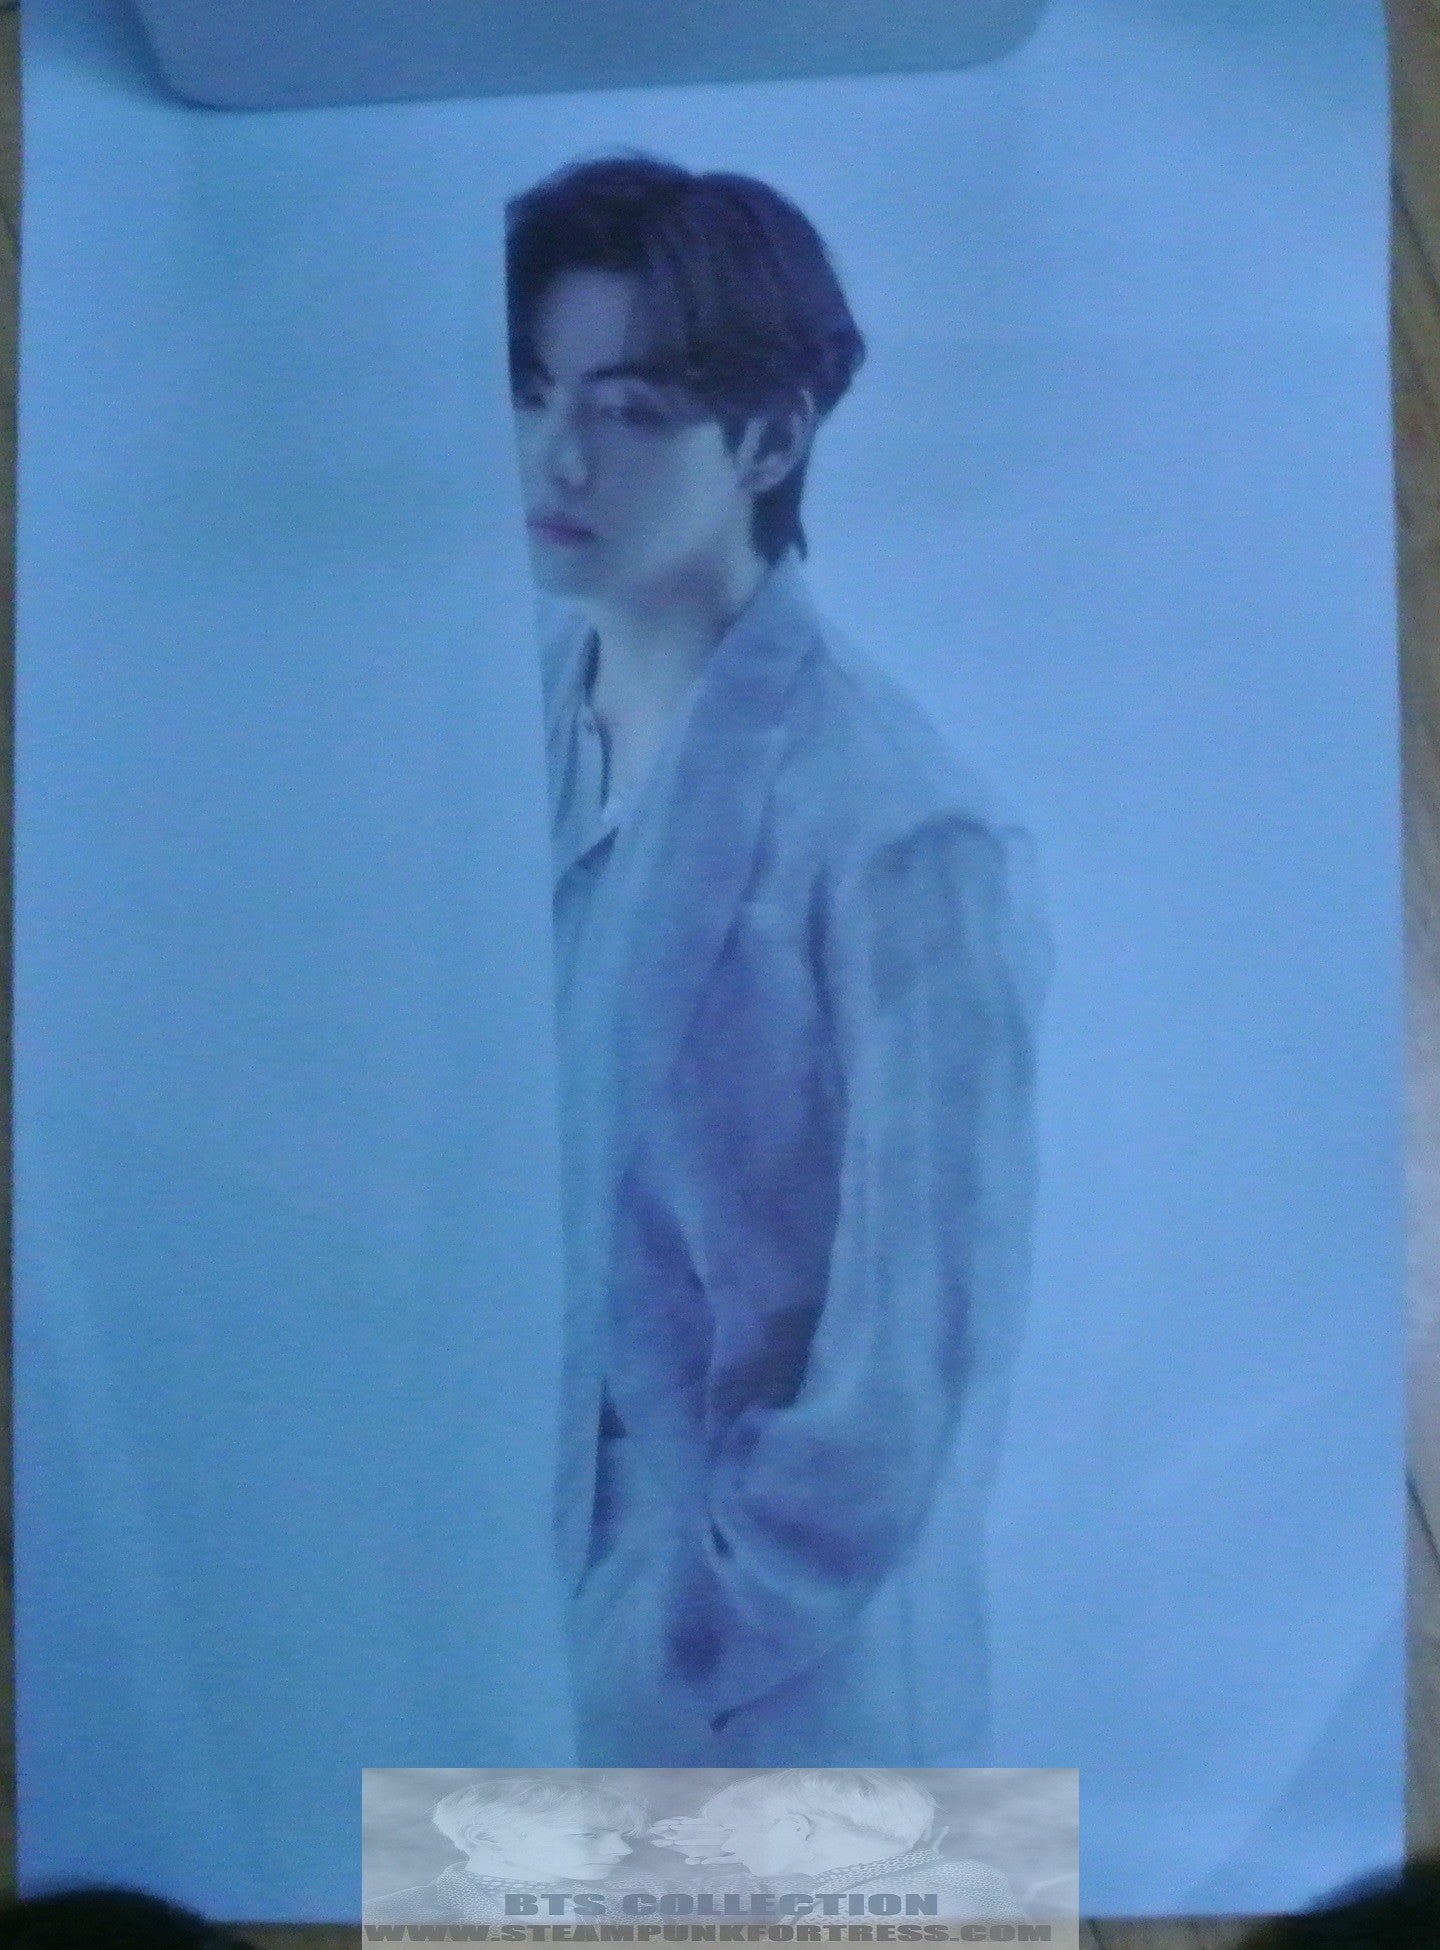 BTS V KIM TAEHYUNG POSTER PROOF DRAPES EXHIBITION SEOUL HYBE INSIGHT MUSEUM NEW